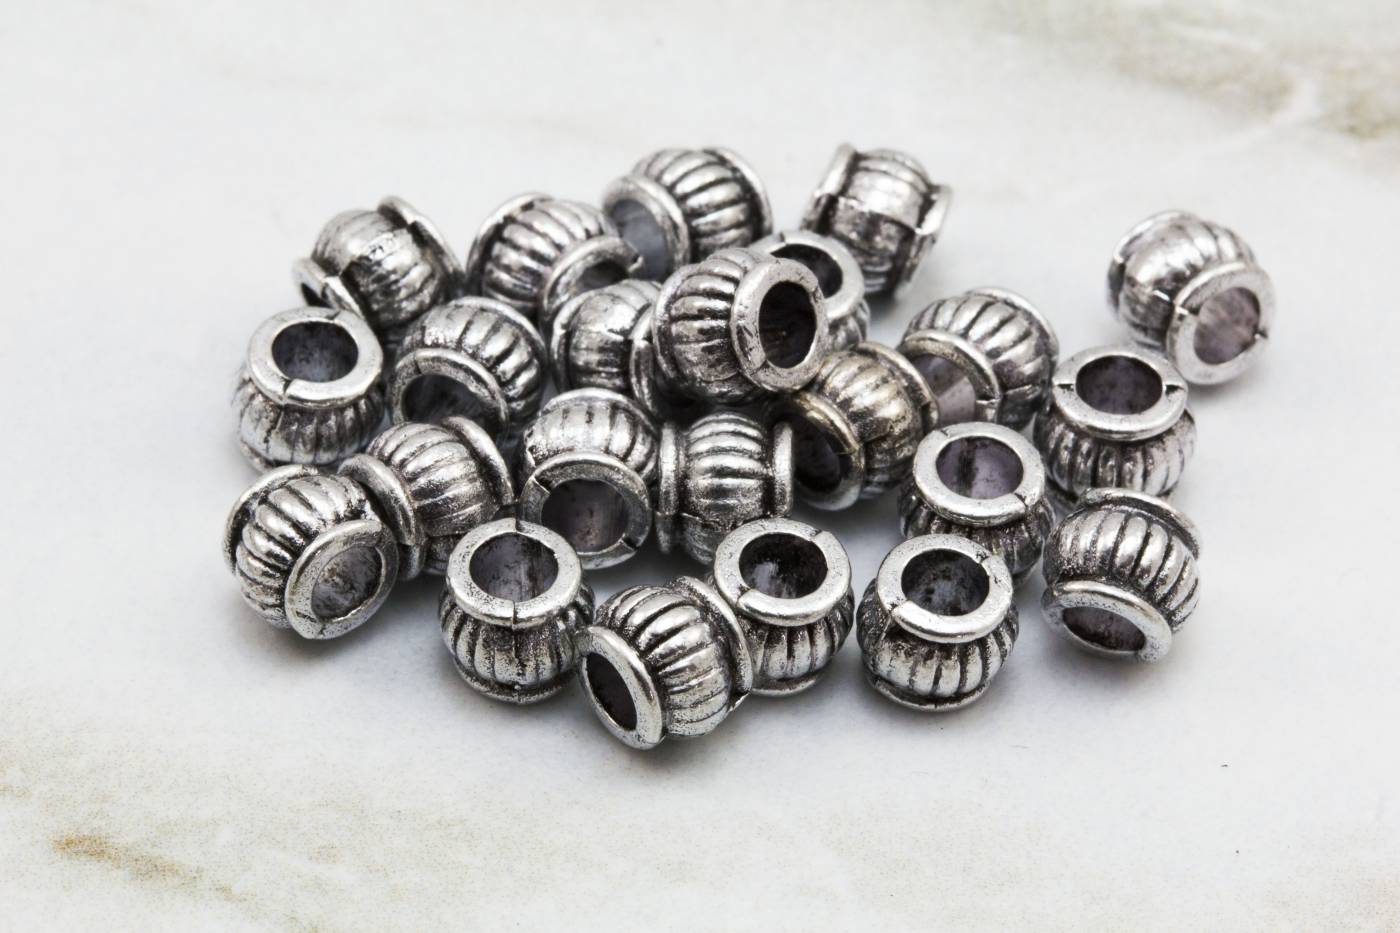 6mm-small-metal-jewelry-spacer-findings